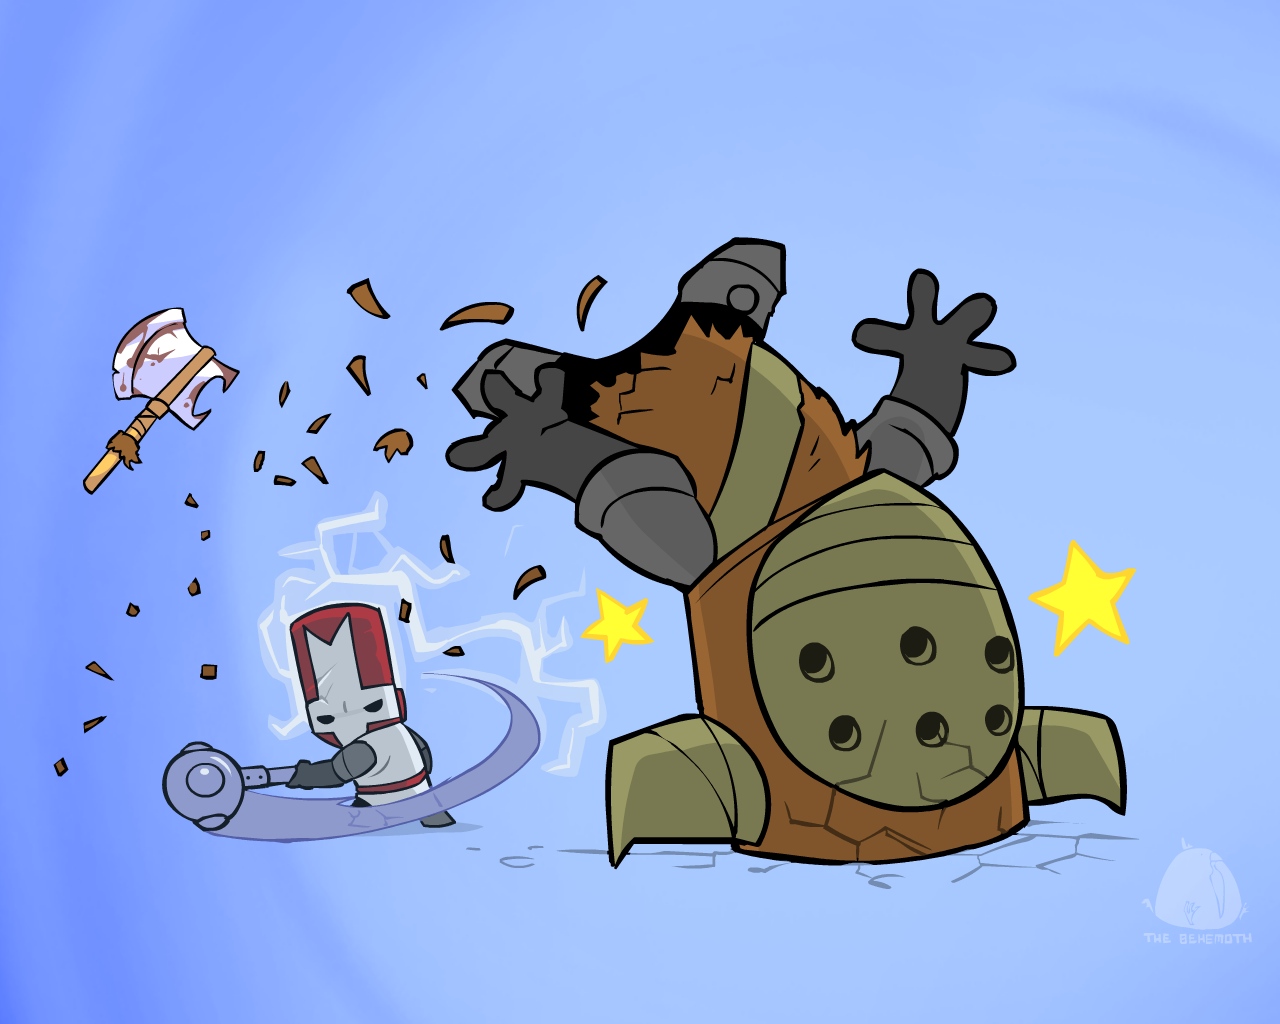 How to XP and get money easily. for Castle Crashers